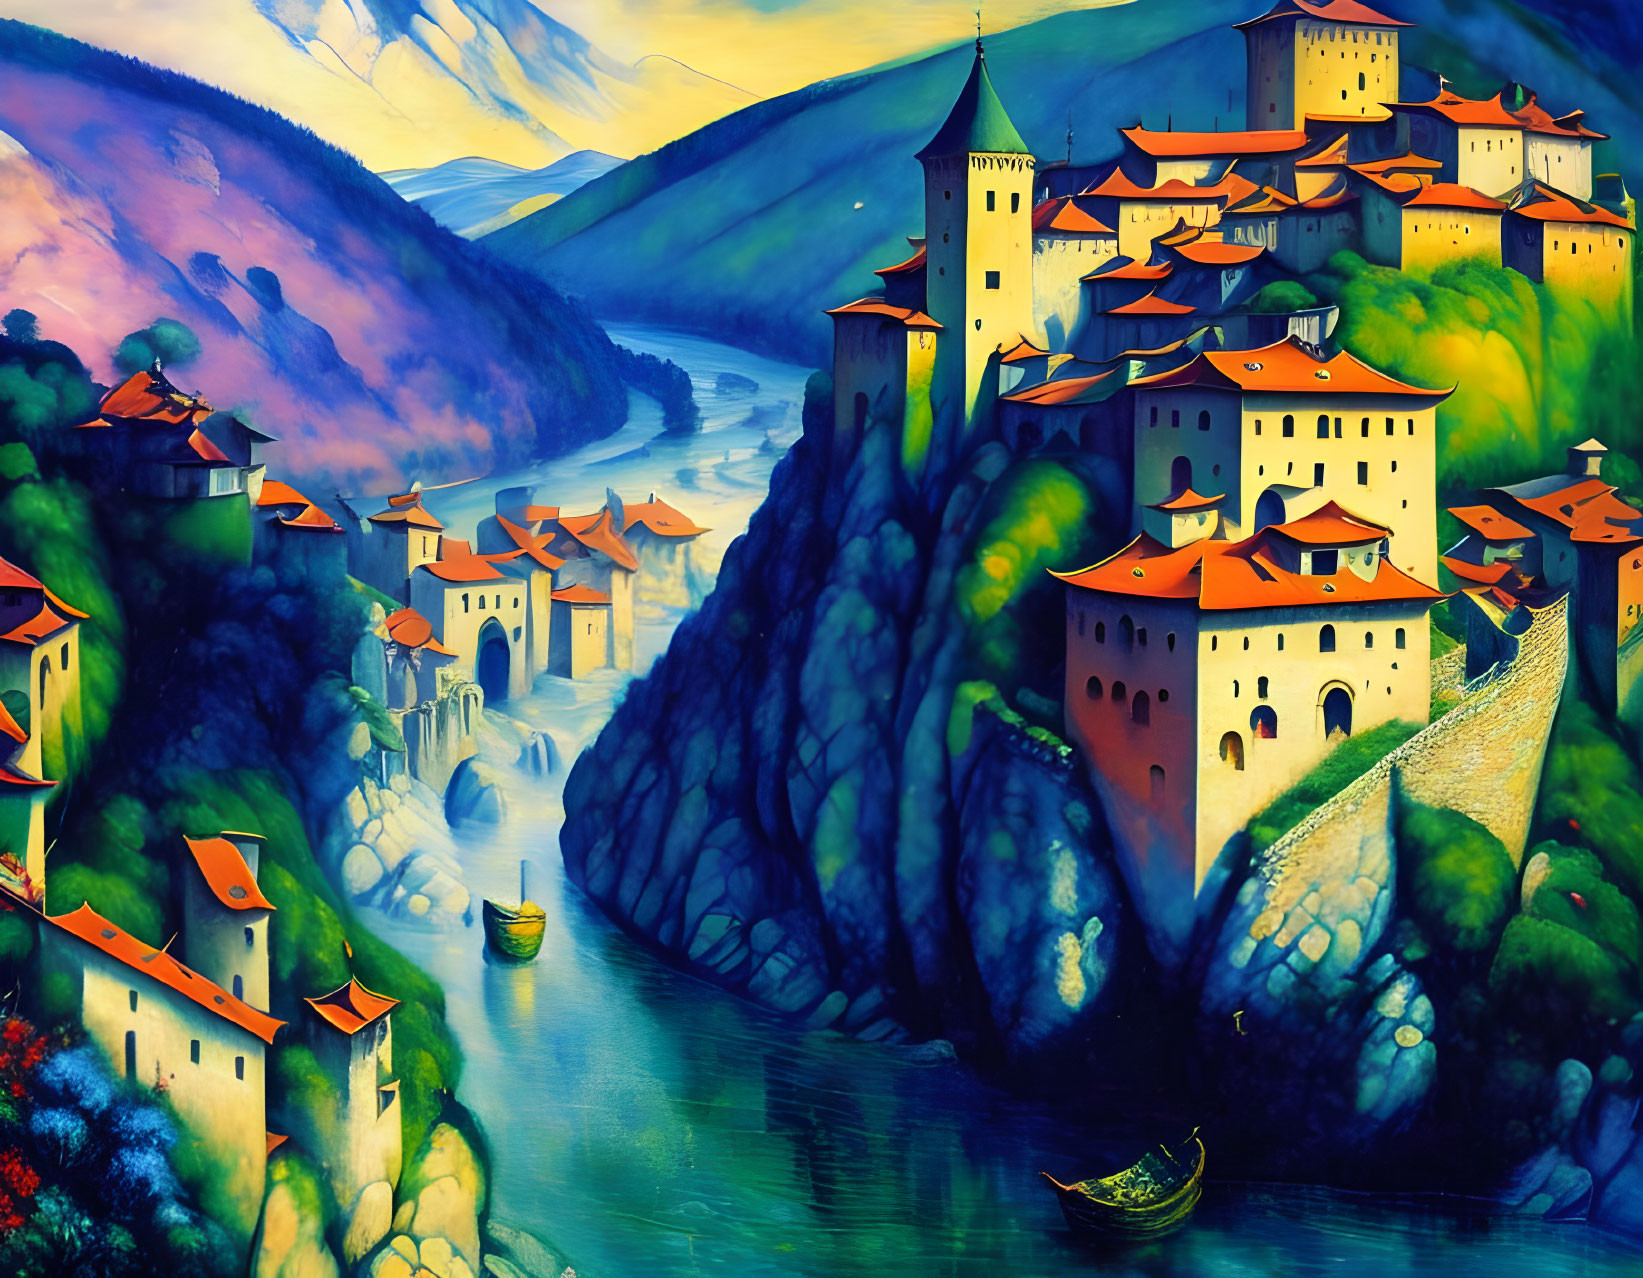 Fantasy illustration of vibrant castle town on cliffs by river